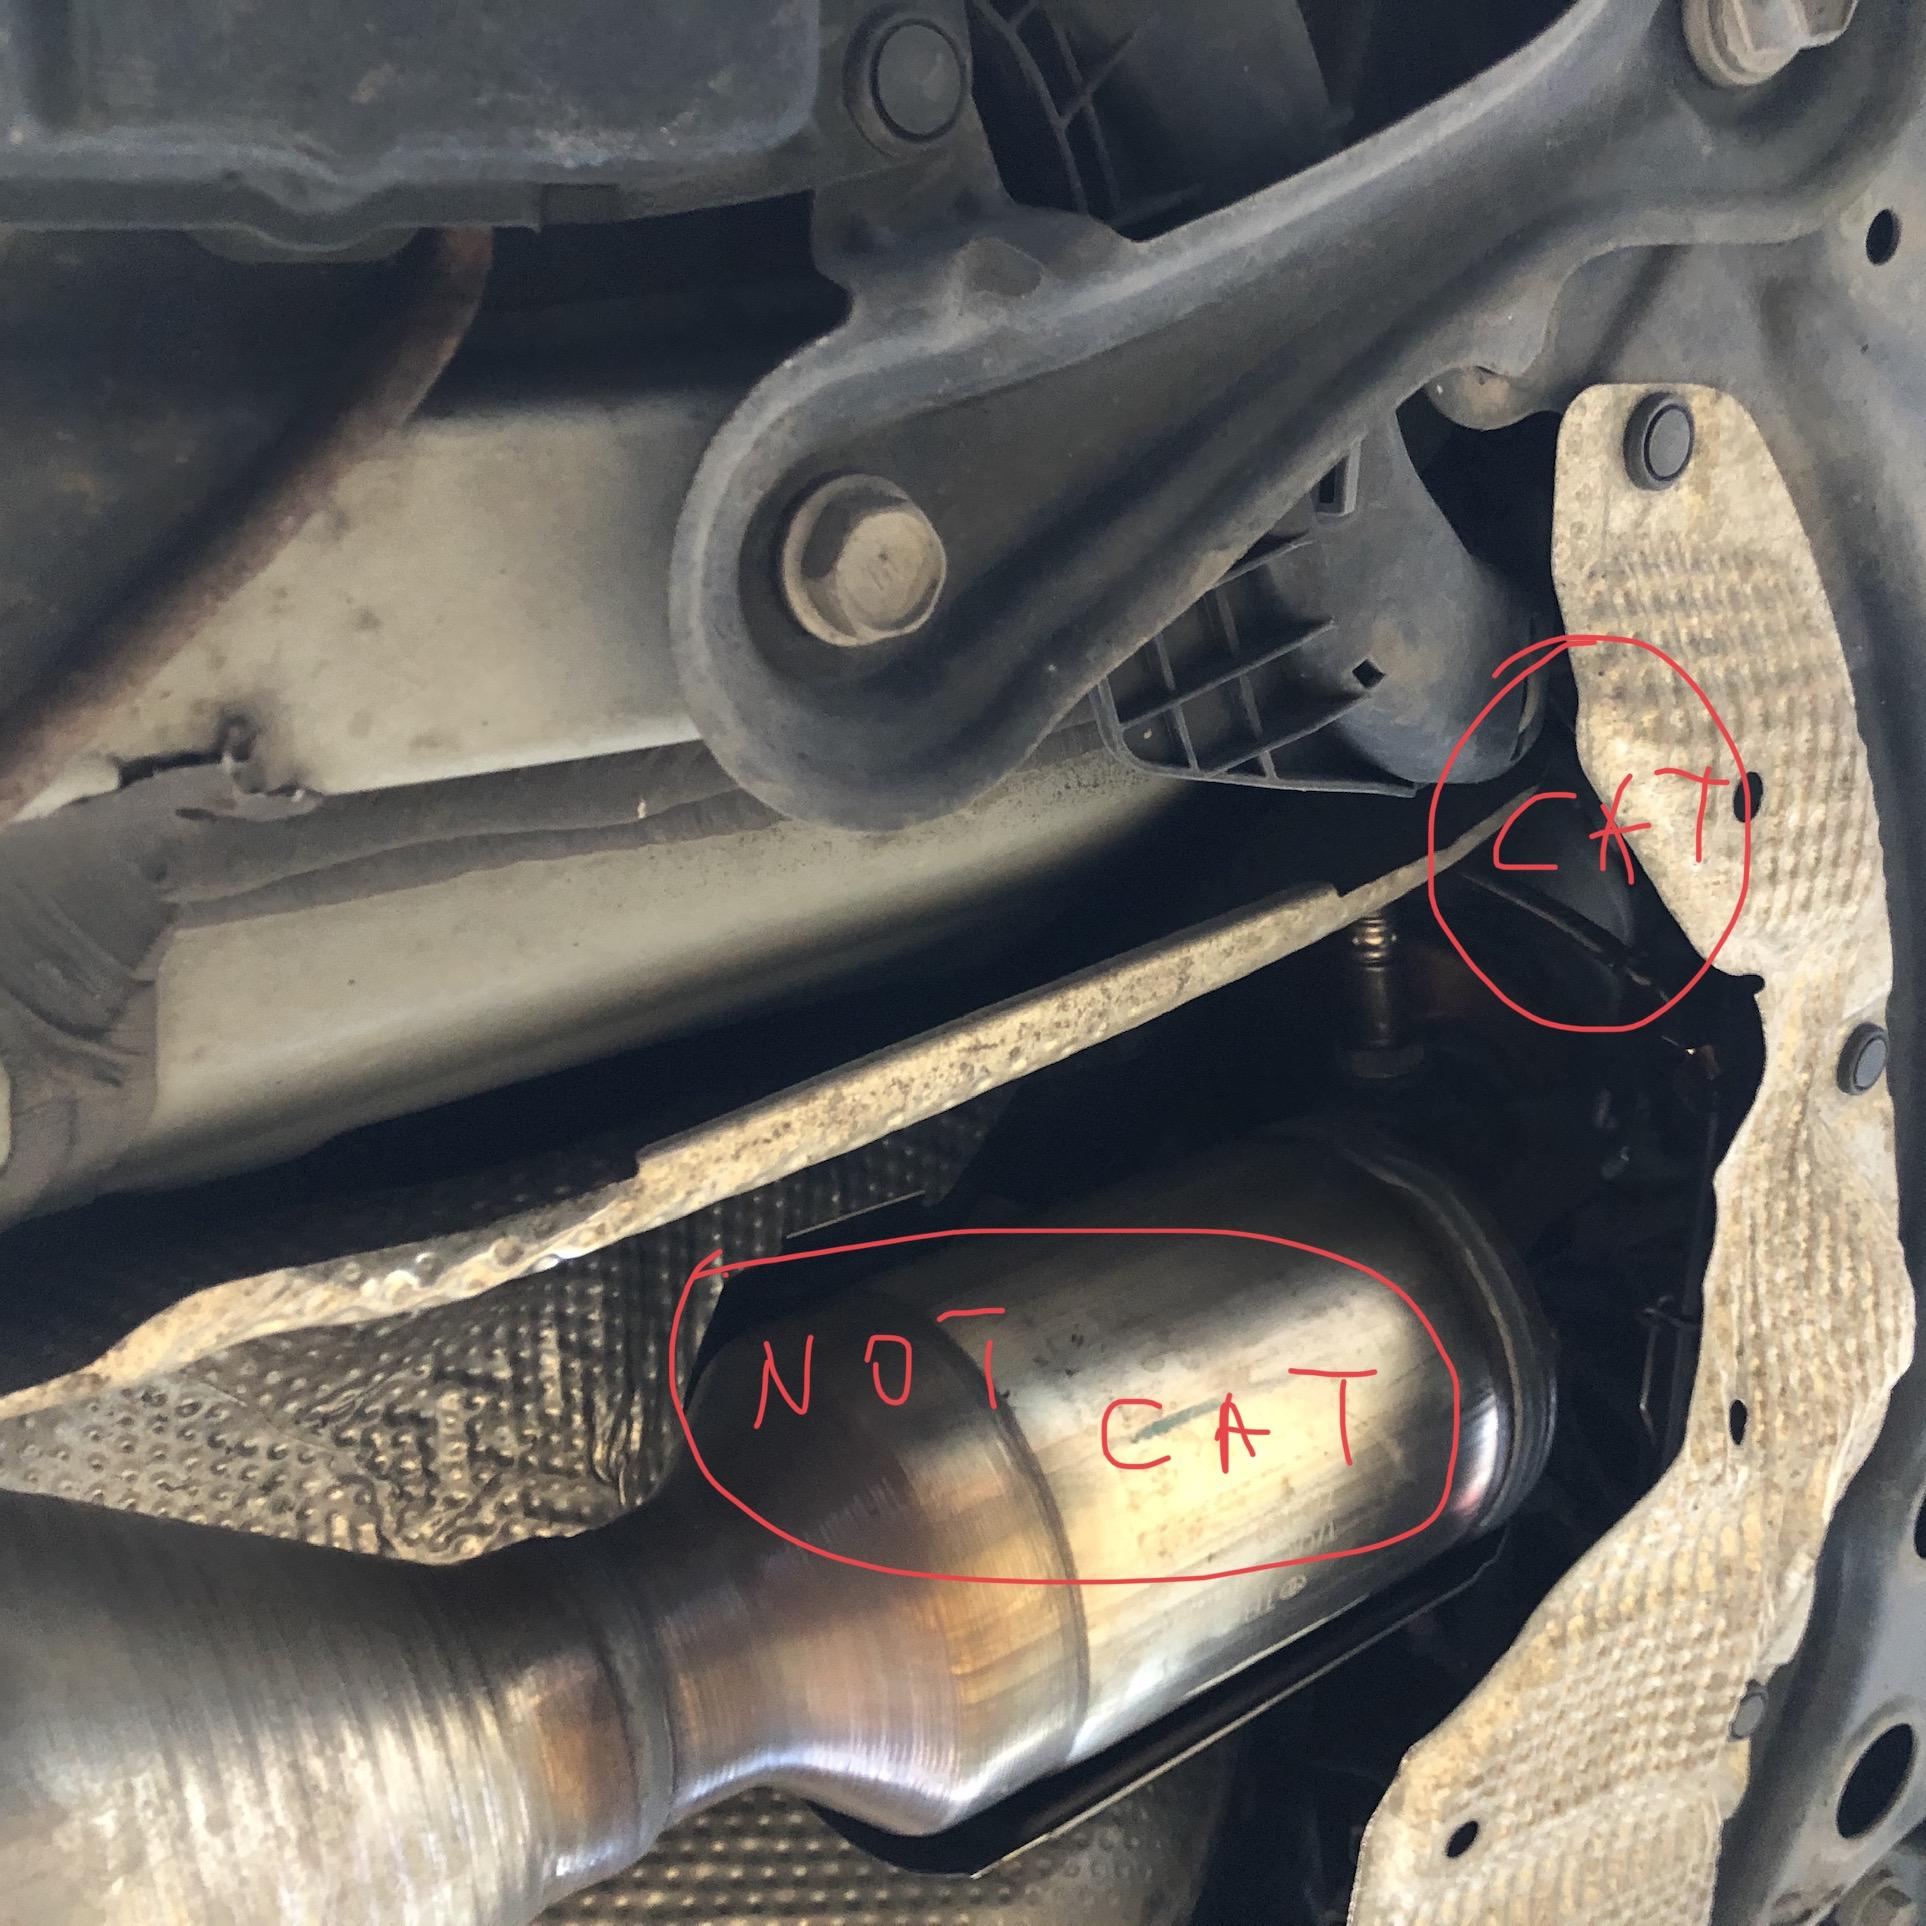 Catalytic Converter Thefts Page 3 Corolla Club